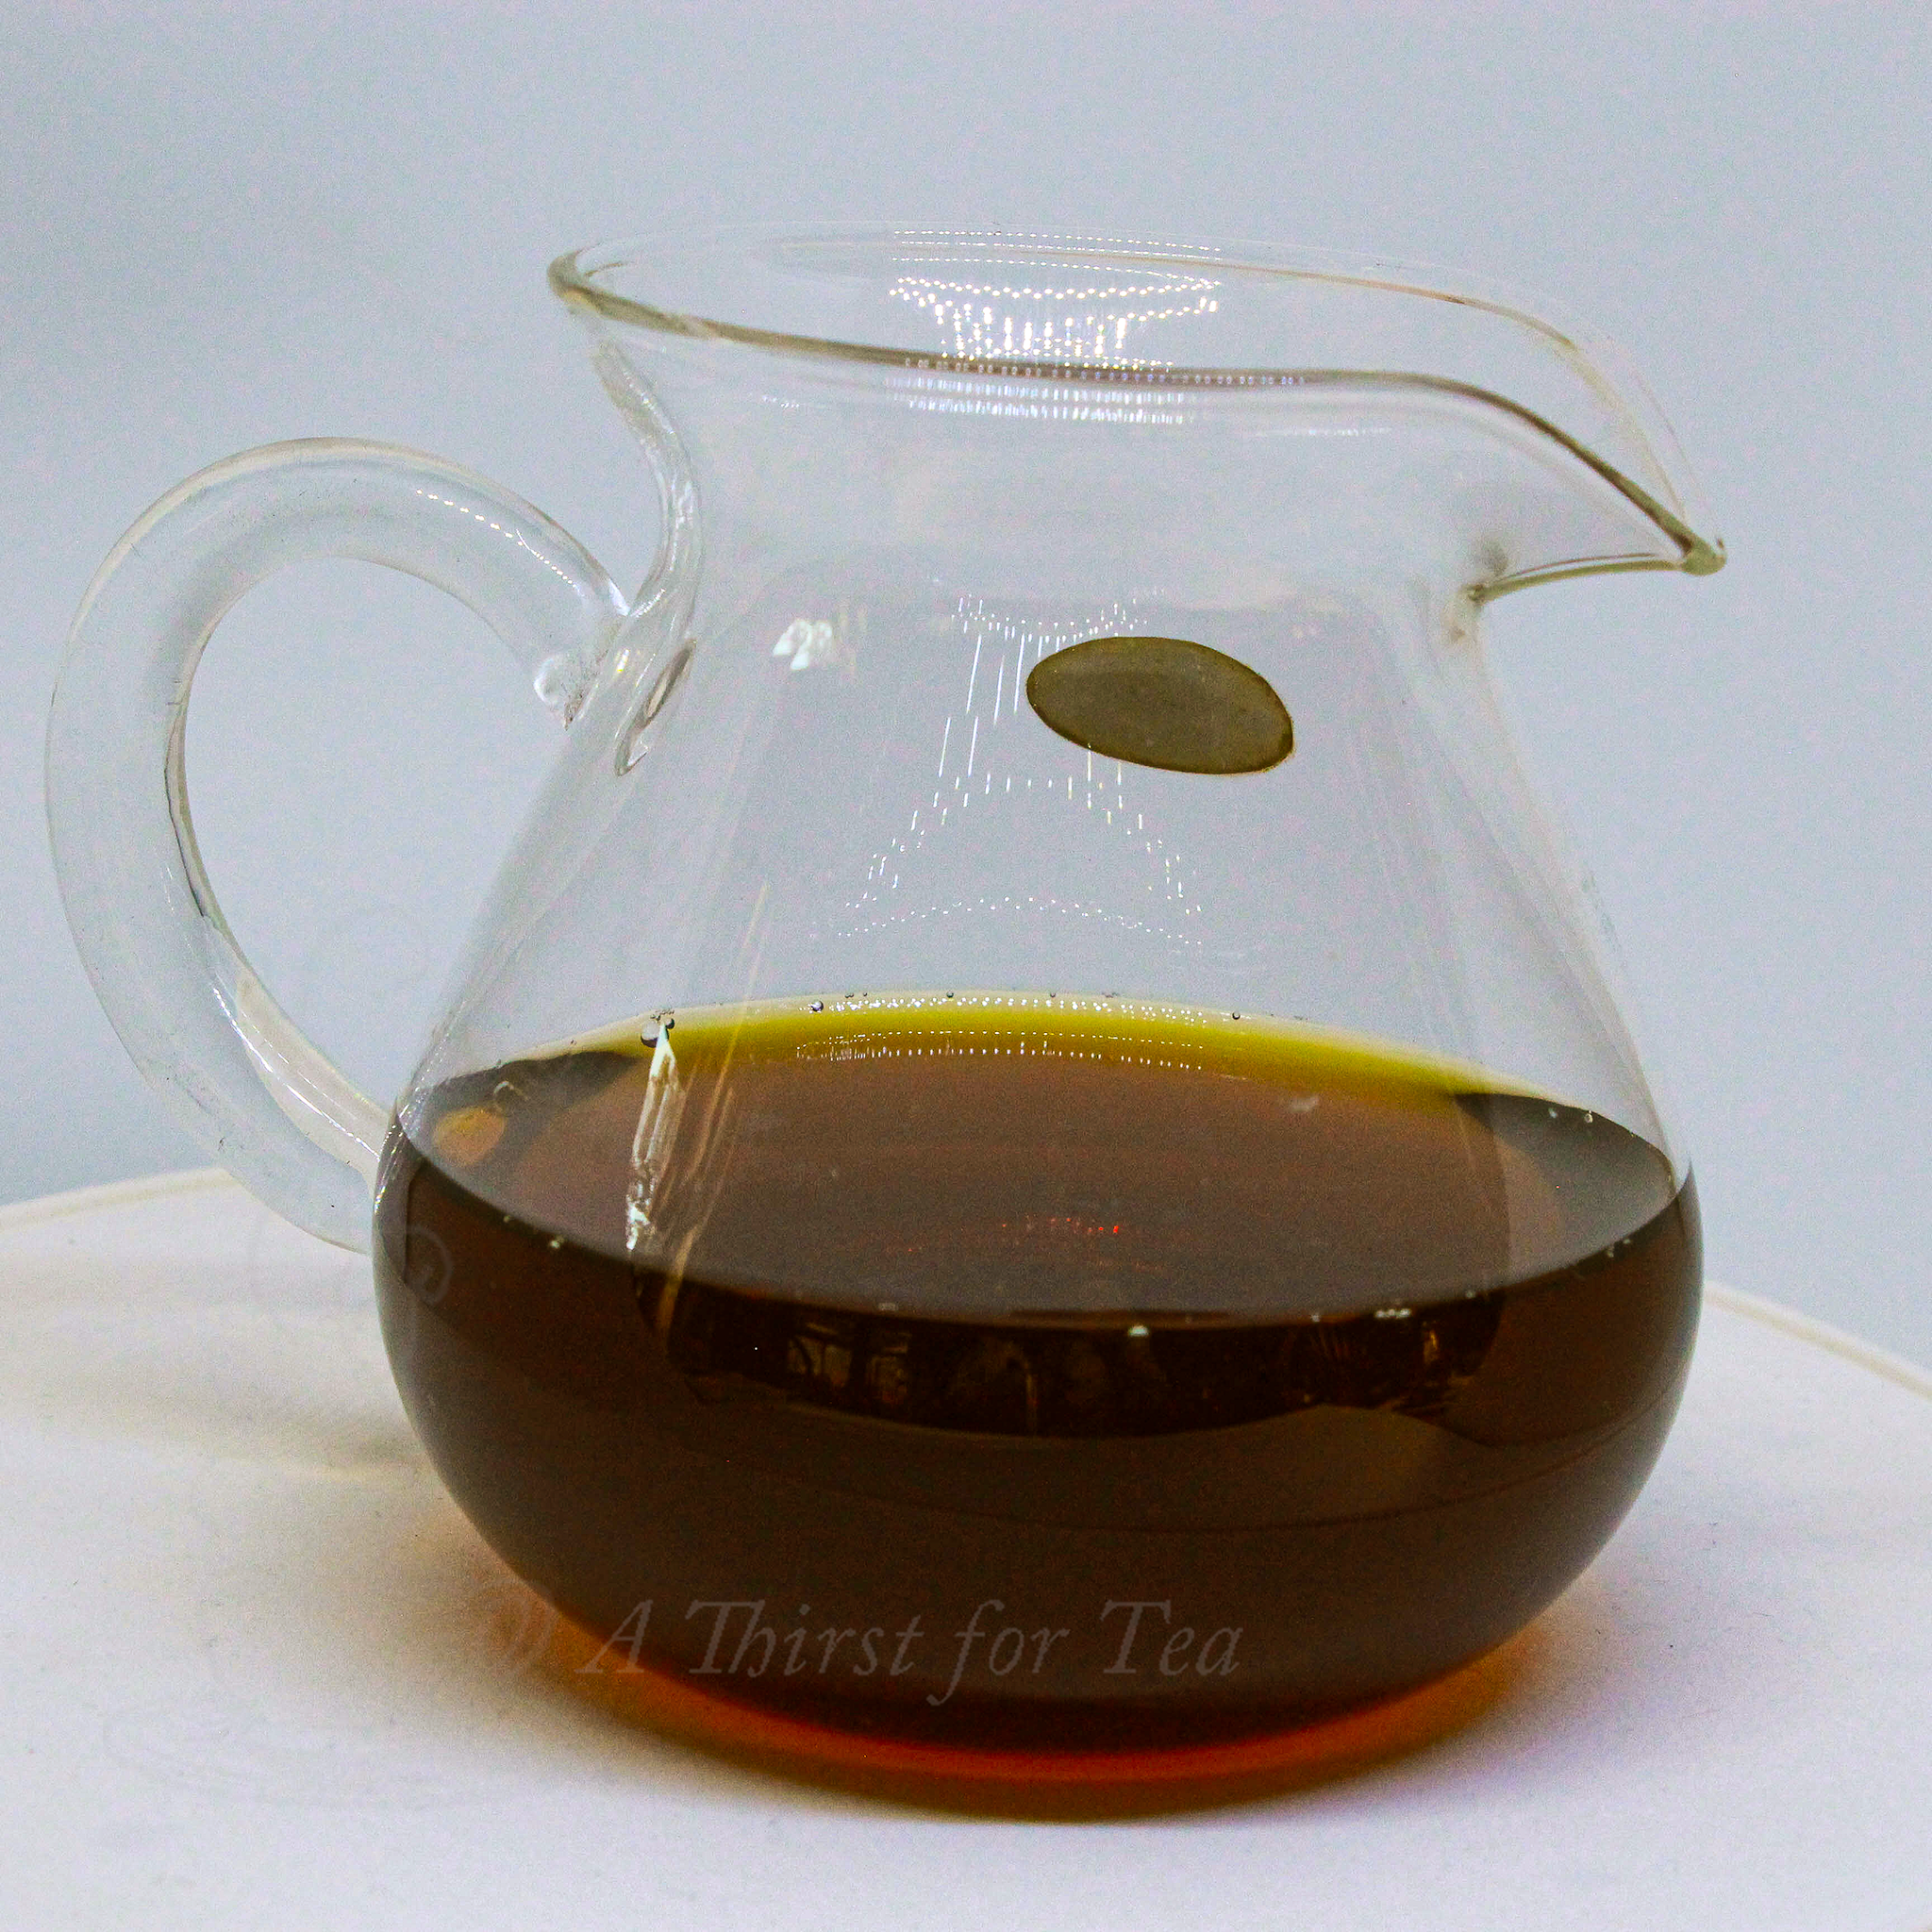 Glass Cha Hai Loose Leaf Tea Brewing & Serving Pitcher w/t In Built Filter  300ml